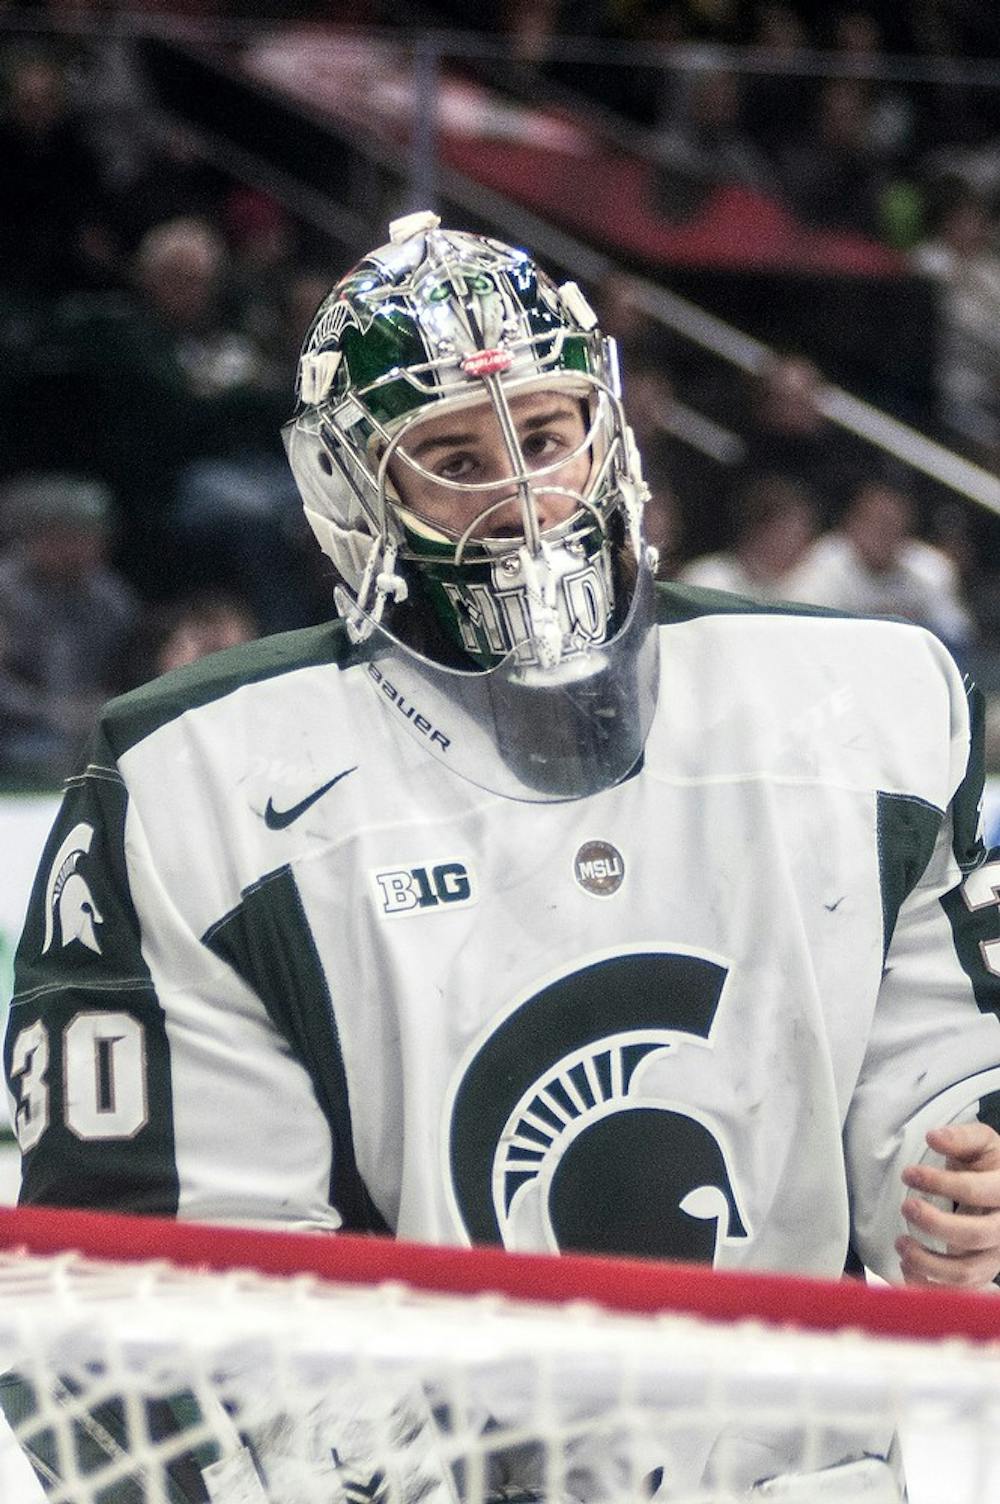 <p>Junior goaltender Jake Hildebrand skates around the goal Feb. 13, 2015, at Munn Ice Arena. The Spartans defeated Penn State, 3-0. The teams will play each other again Feb. 14, 2015. Allyson Telgenhof/The State News.</p>